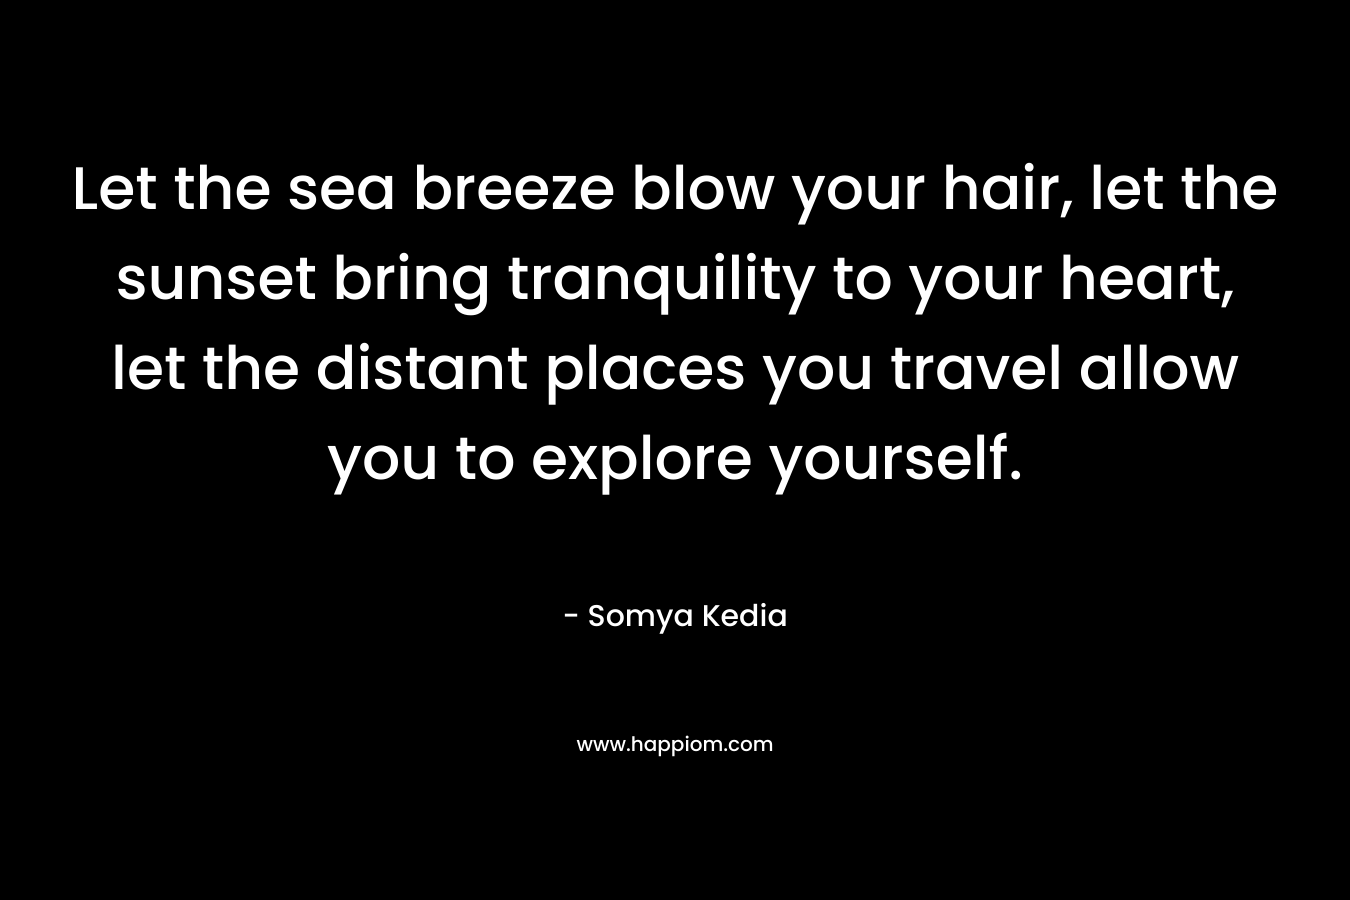 Let the sea breeze blow your hair, let the sunset bring tranquility to your heart, let the distant places you travel allow you to explore yourself. – Somya Kedia